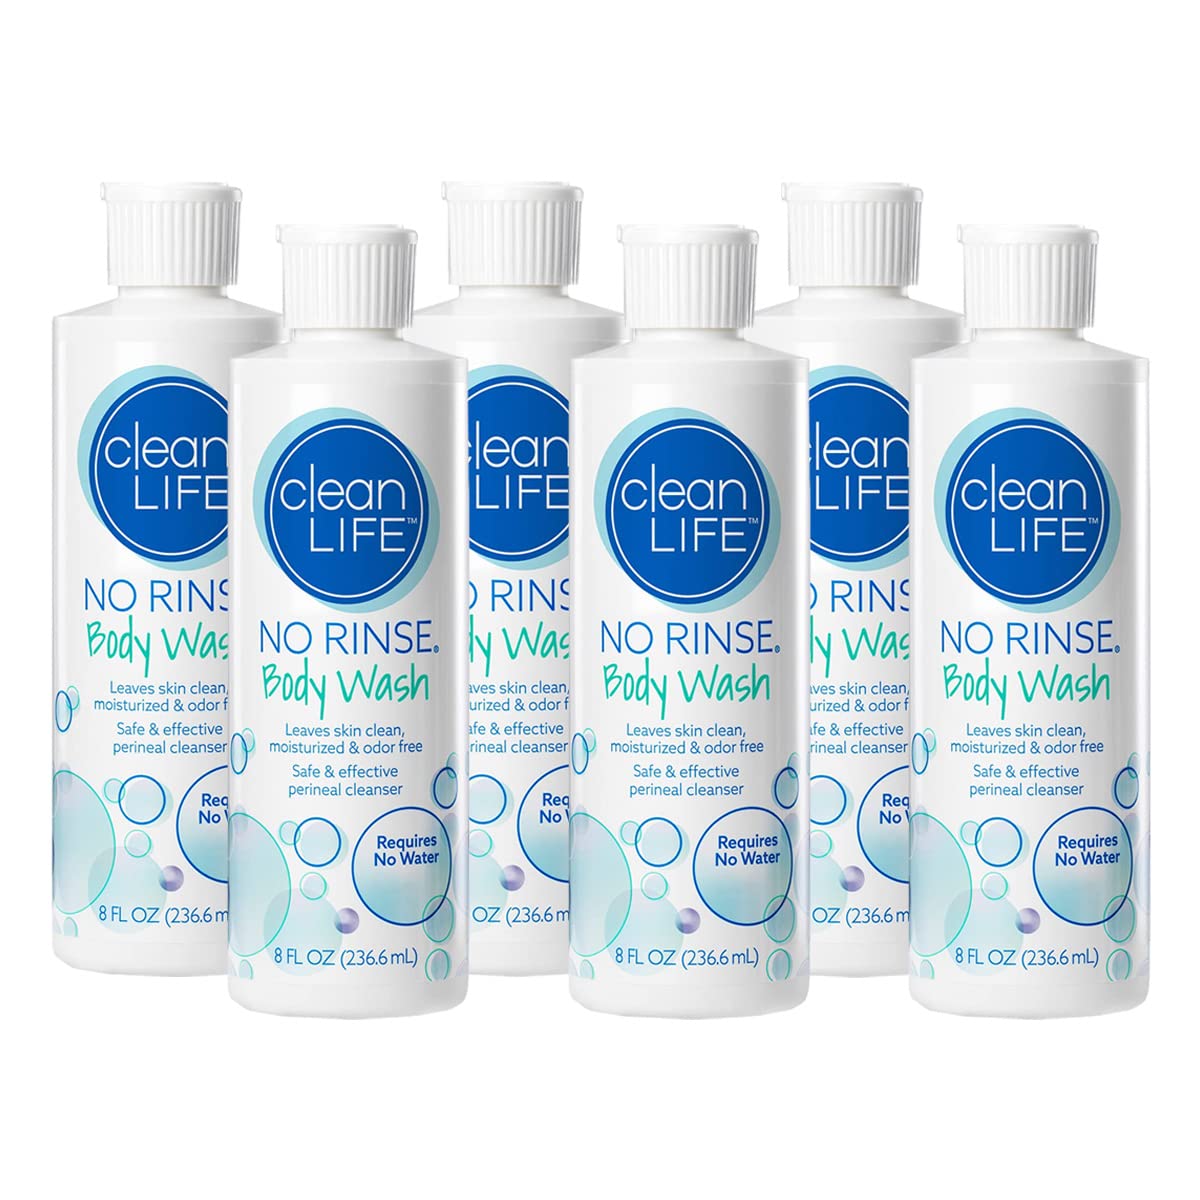 No-Rinse Body Wash, 8 fl oz - Leaves Skin Clean, Moisturized and Odor-Free, Rinse-Free Formula (Pack of 6)